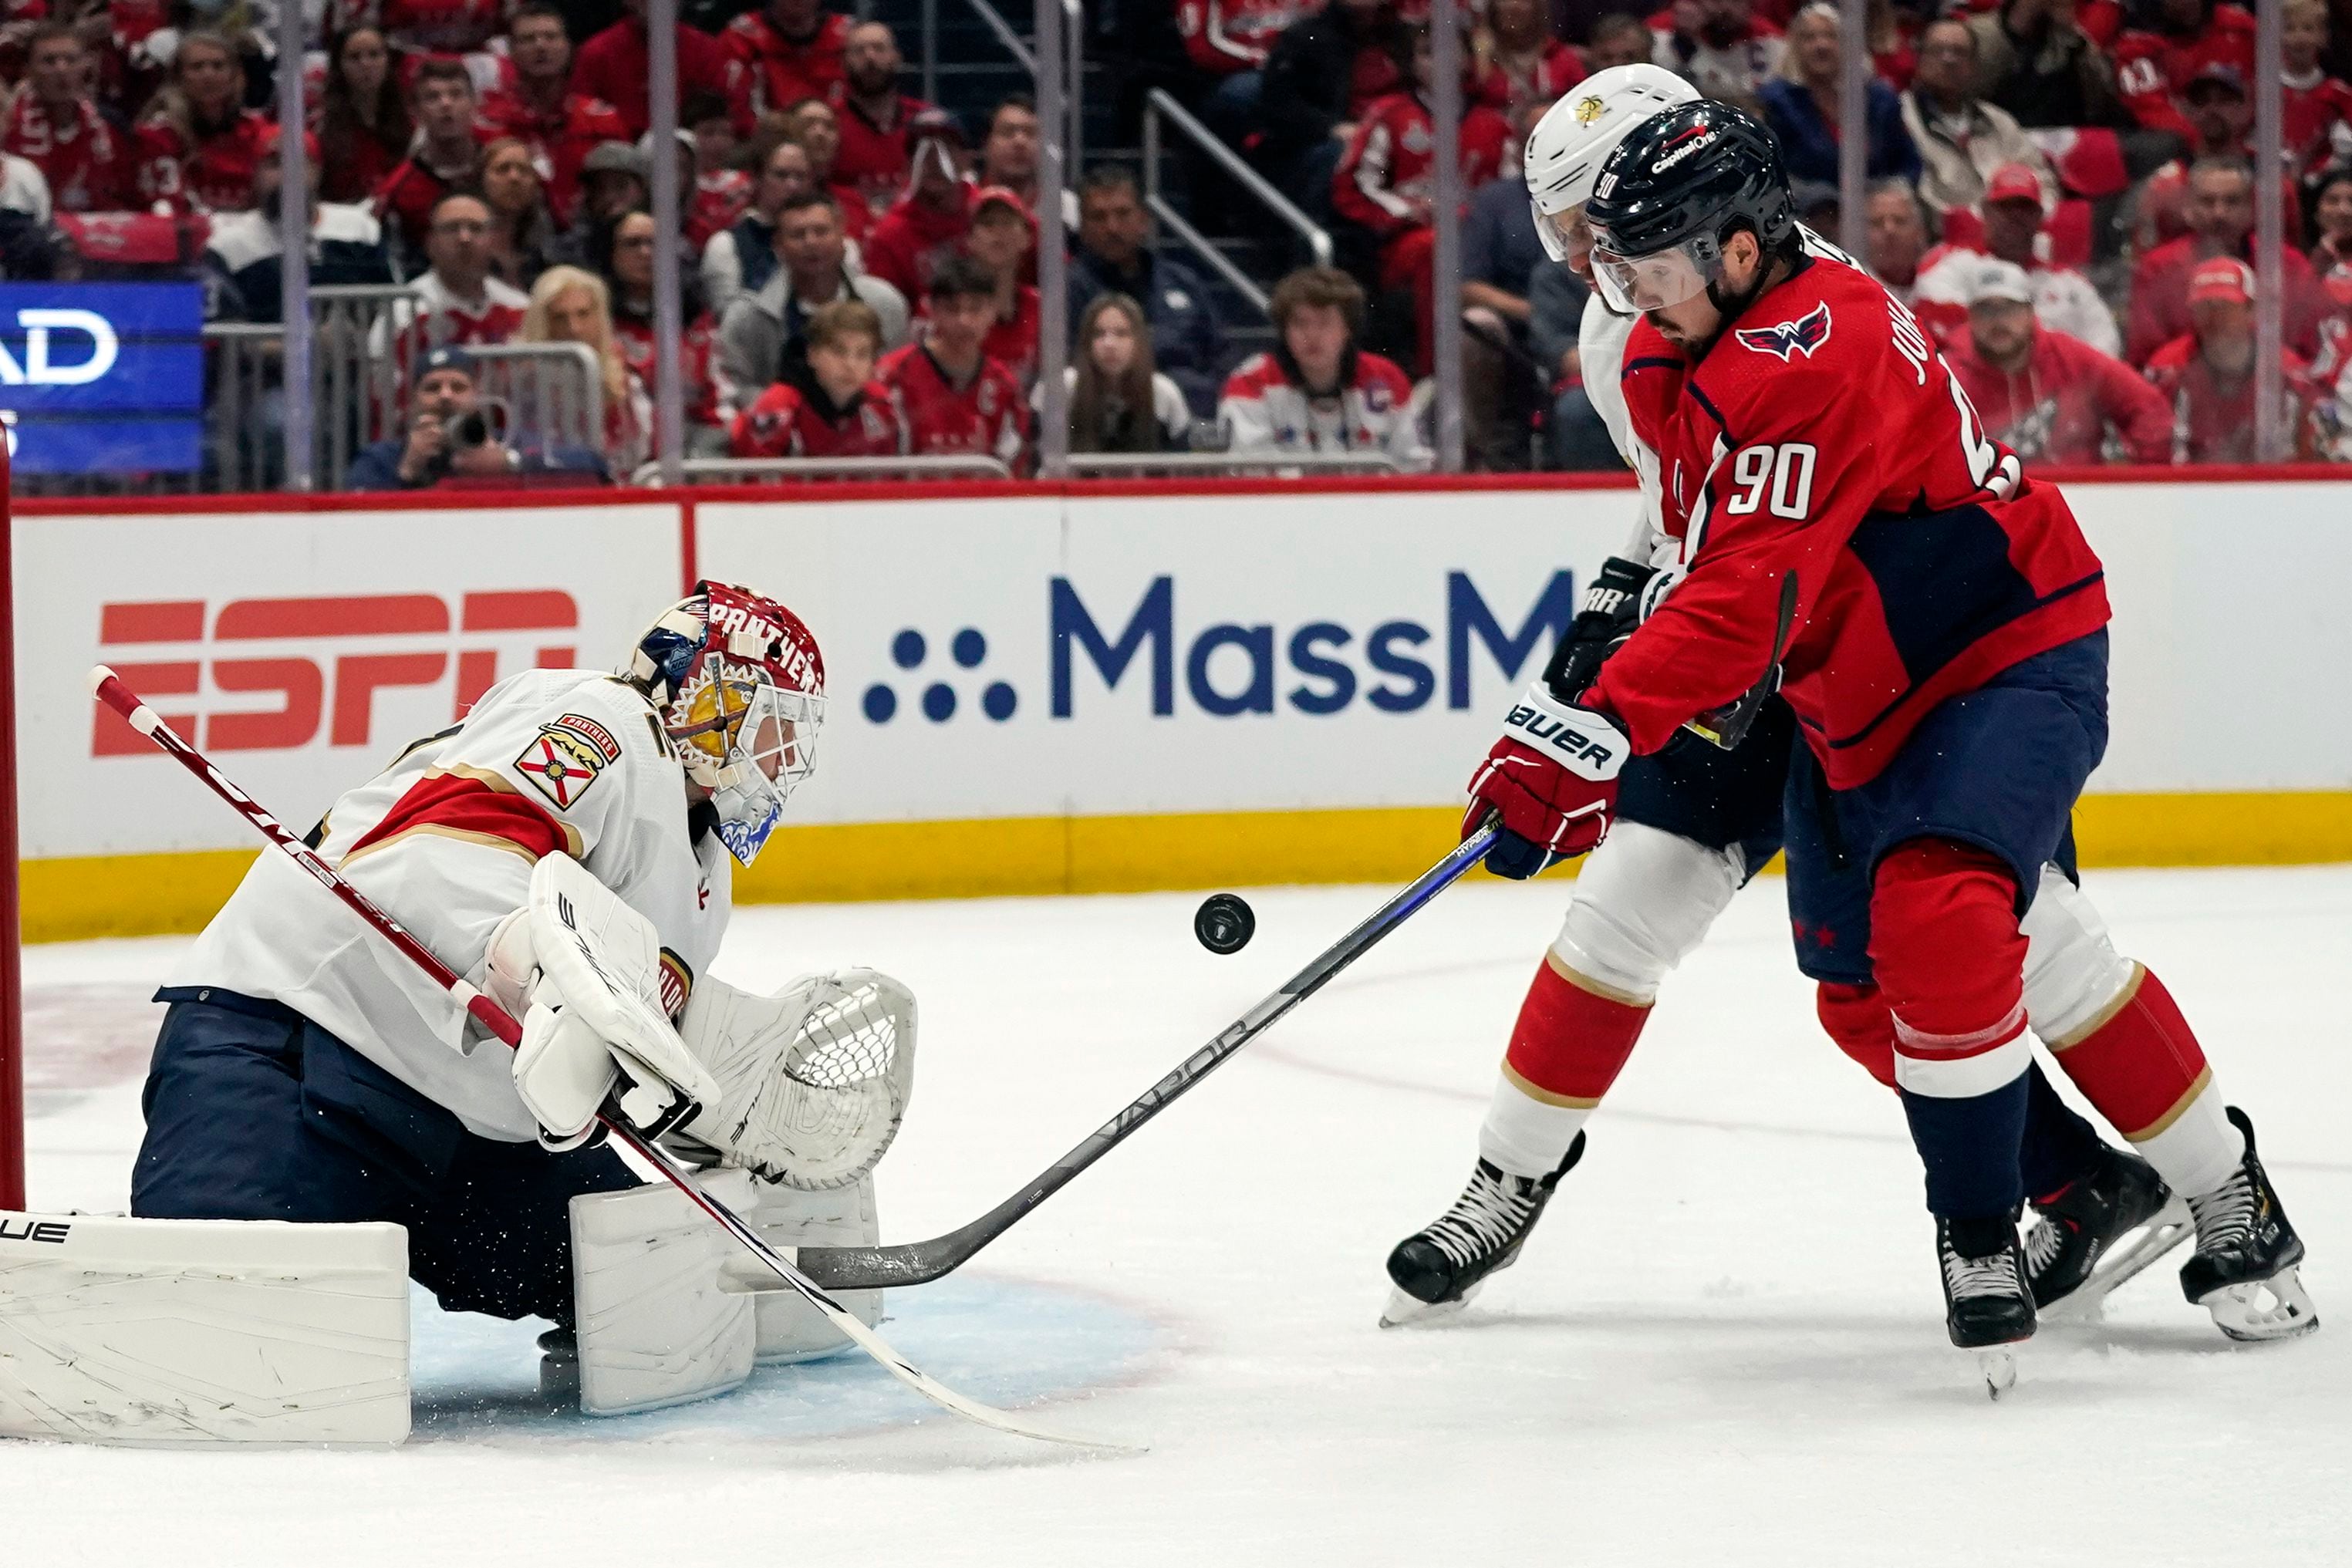 Capitals rally late, stun top-seeded Panthers in Game 1